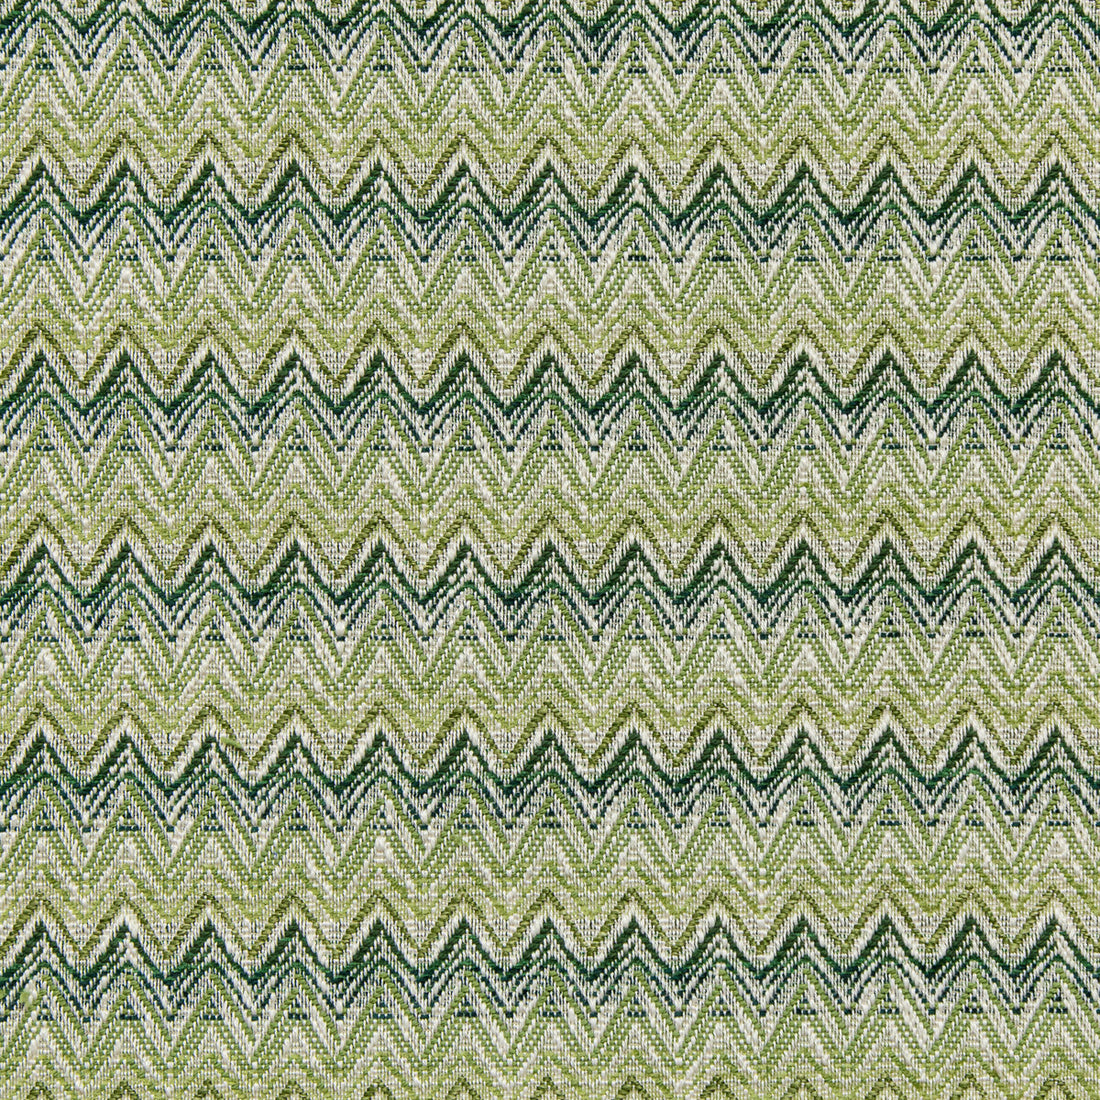 Cambrose Weave fabric in aloe color - pattern 2020107.303.0 - by Lee Jofa in the Linford Weaves collection